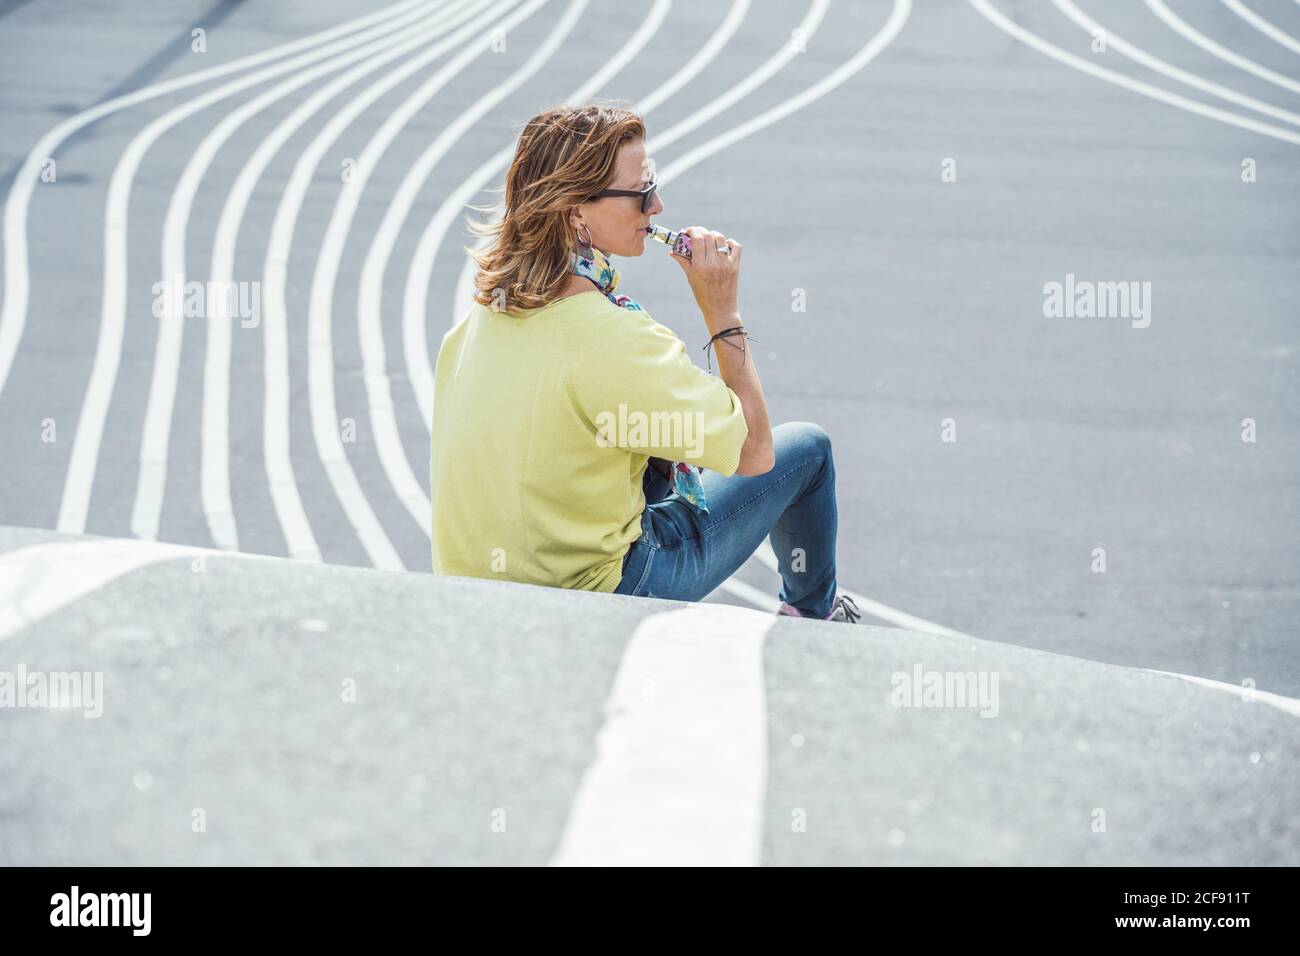 Side view of adult chilling Woman in sunglasses and colorful outfit exhaling steam while sitting on twisting asphalt road Stock Photo